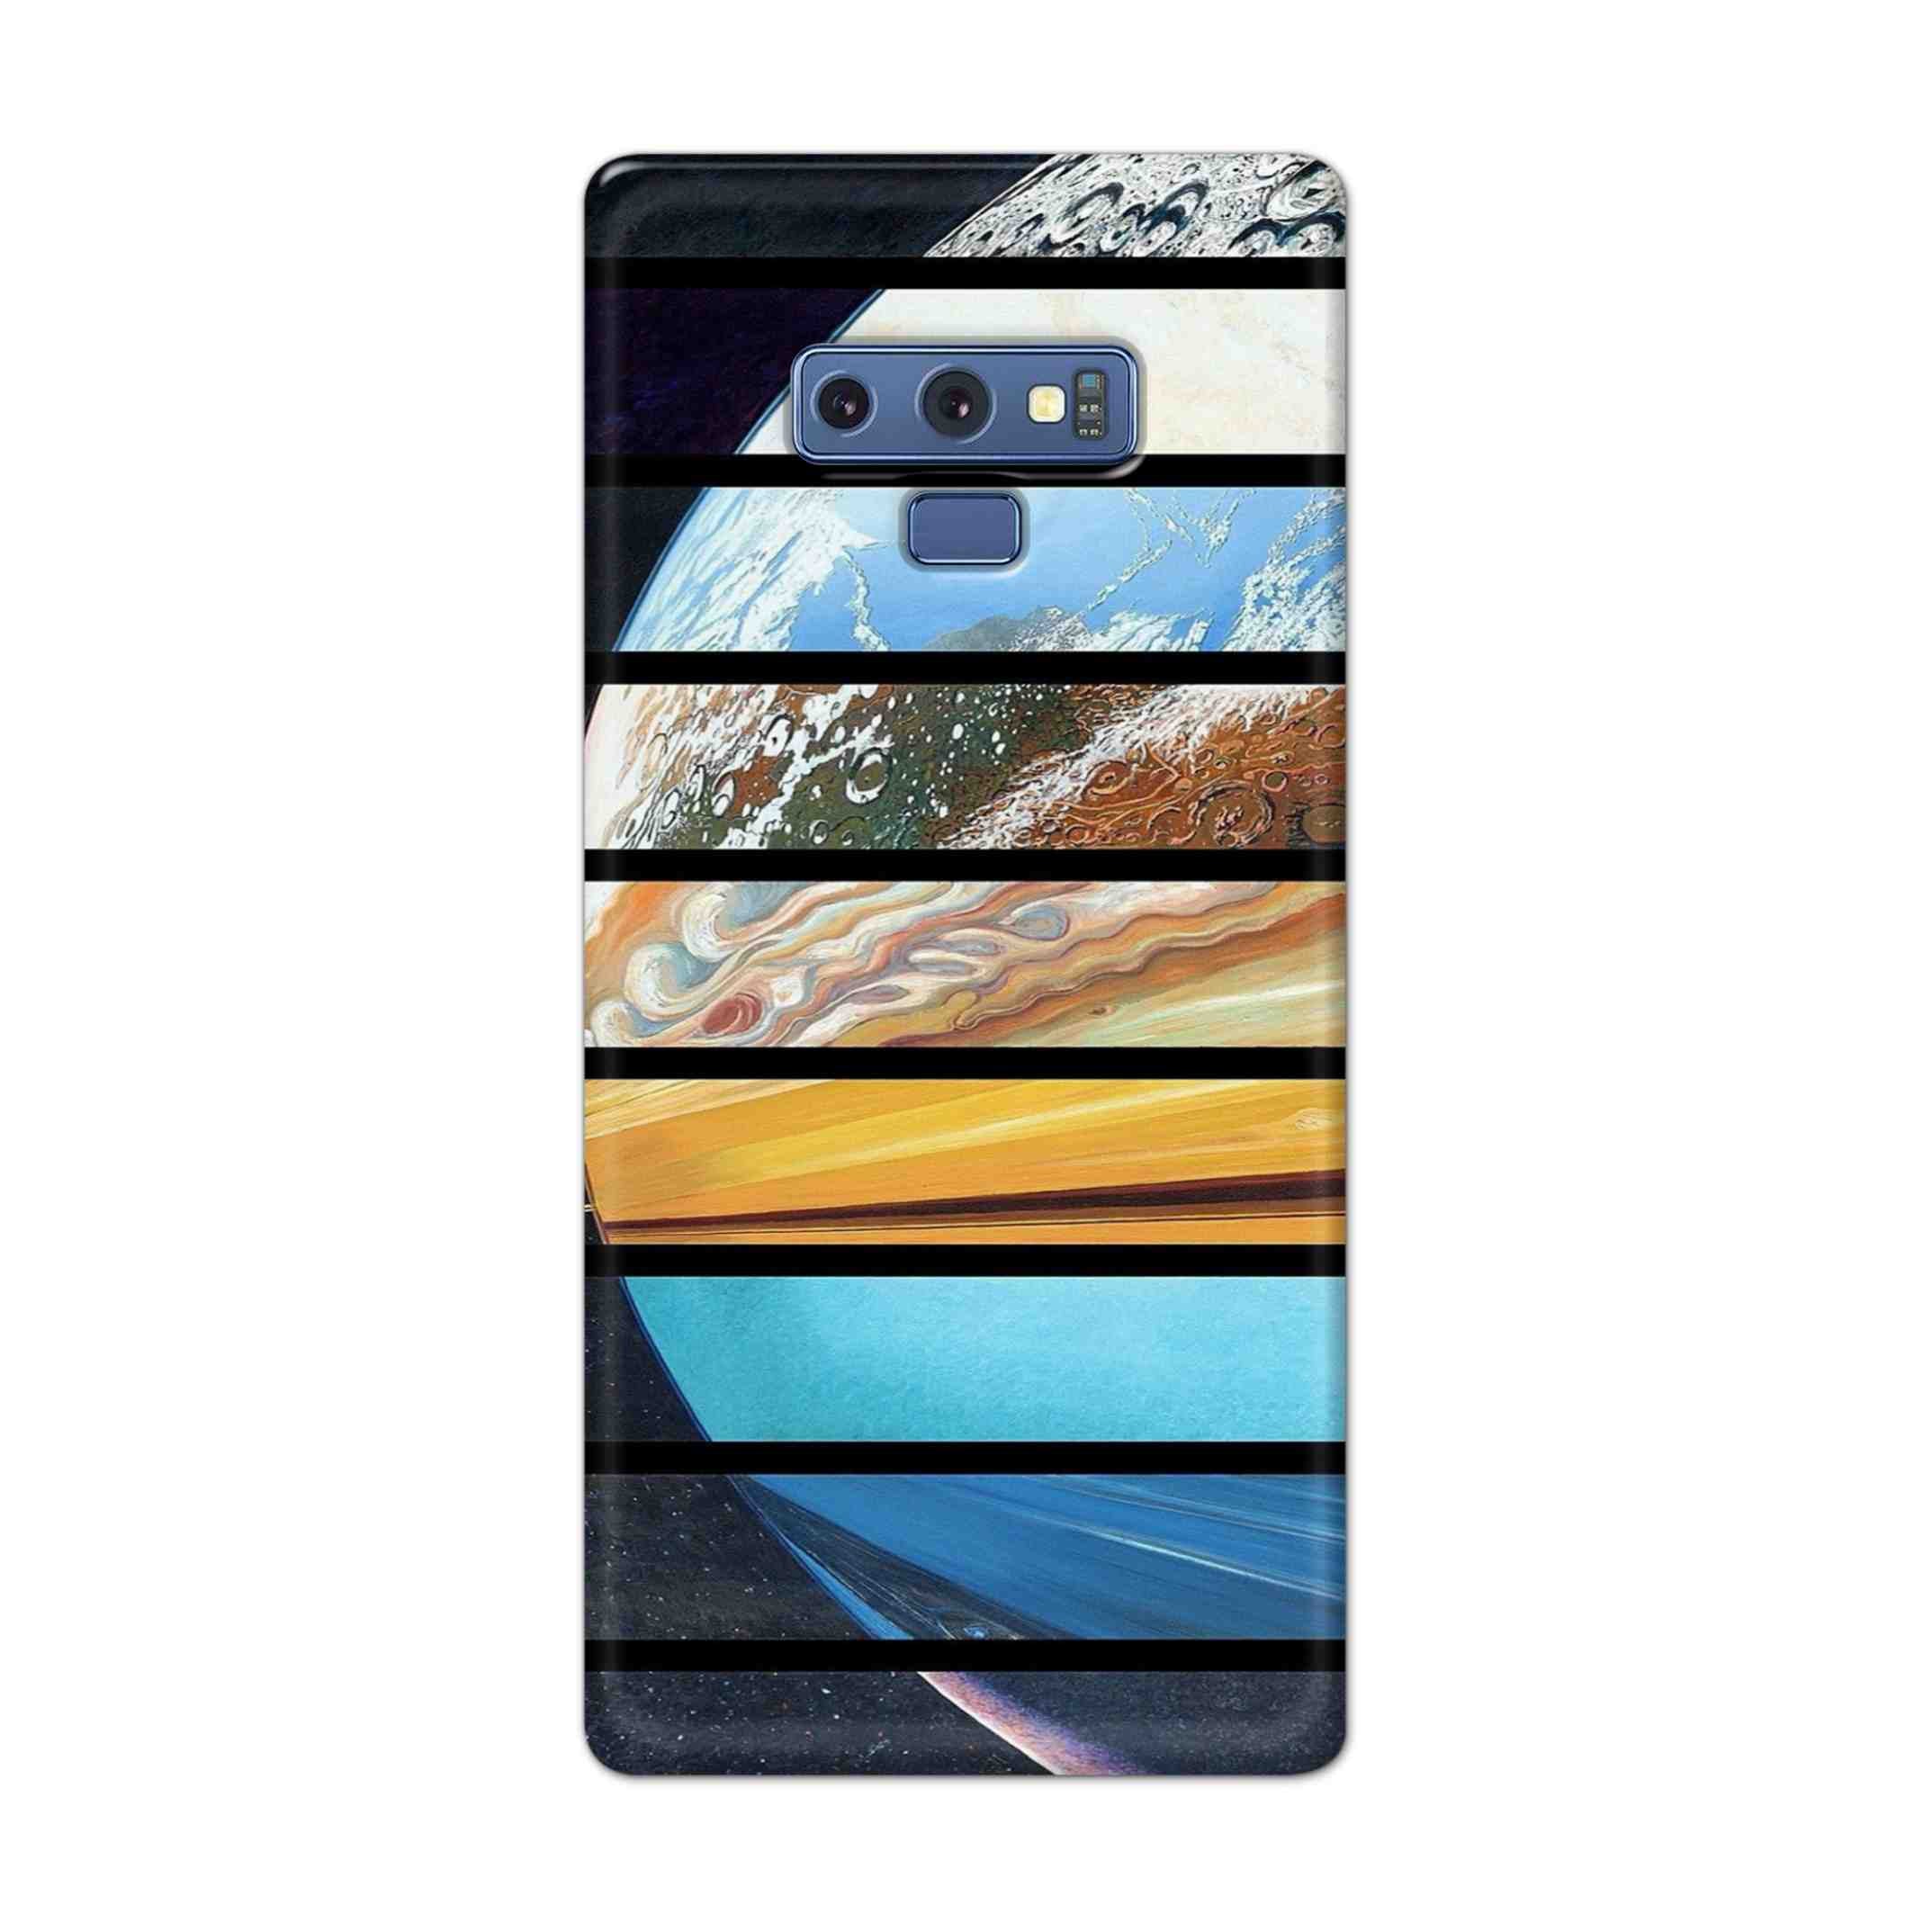 Buy Colourful Earth Hard Back Mobile Phone Case Cover For Samsung Galaxy Note 9 Online